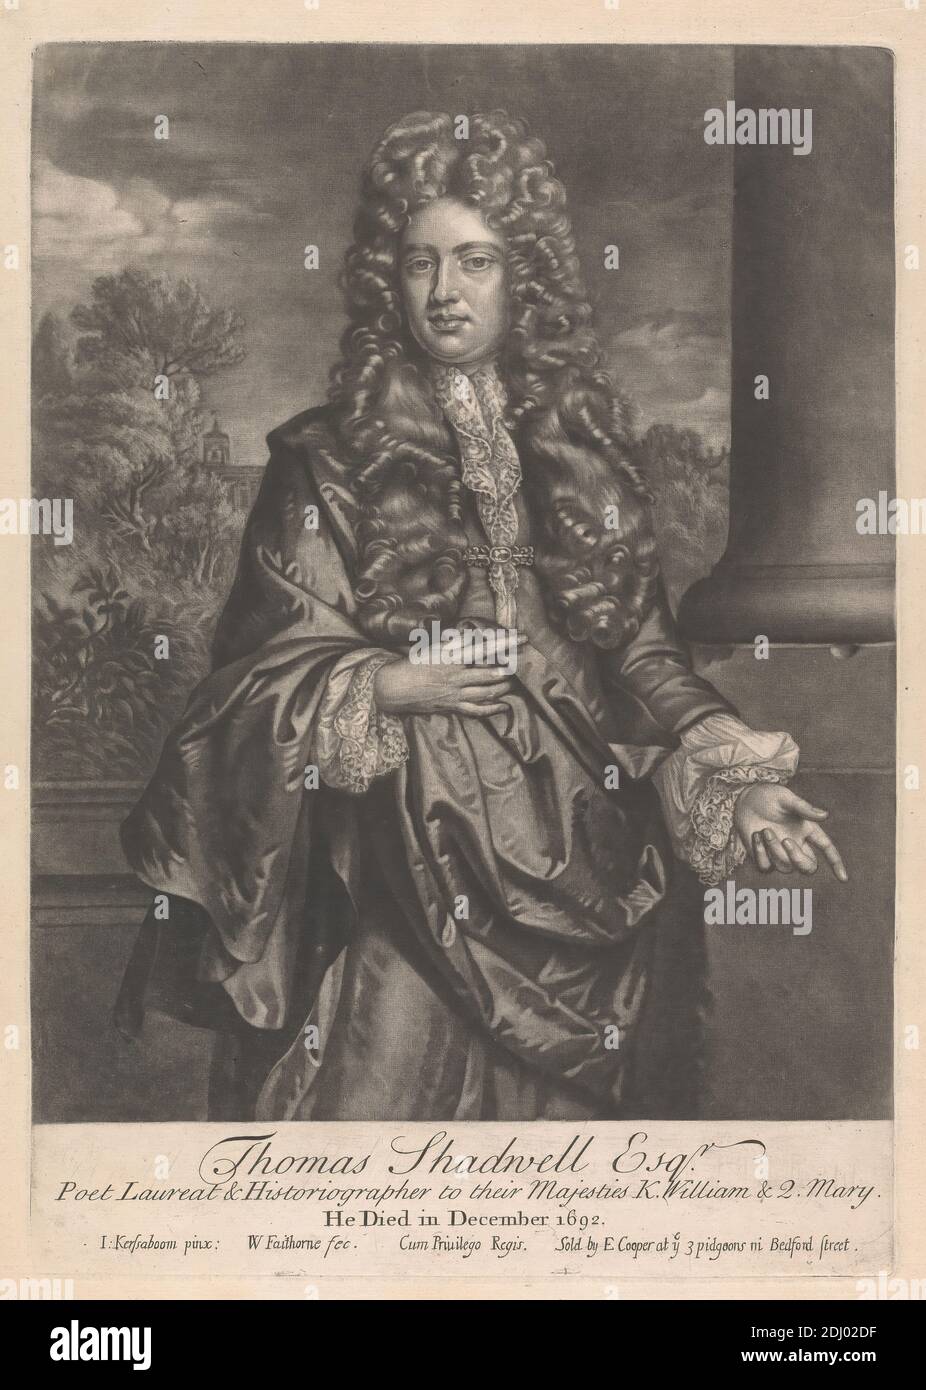 Thomas Shadwell, Esquire, Poet Laureat & Historiographer, Print made by William Faithorne, 1656–ca. 1701, British, after John Kerseboom, op.1680 –m. 1708, German, Published by Edward Cooper, active 1682 –died 1725, British, between 1690 and 1703, Mezzotint on moderately thick, slightly textured, beige laid paper, Sheet: 15 13/16 x 11 1/8 inches (40.1 x 28.2 cm), Plate: 13 7/8 x 9 3/4 inches (35.2 x 24.7 cm), and Image: 12 1/16 x 9 3/4 inches (30.7 x 24.7 cm), broche, building, clouds, columns, cravat, cuffs, curls, gesturing, historian, lace, man, nobleman, pin, playwright, poet, pointing Stock Photo